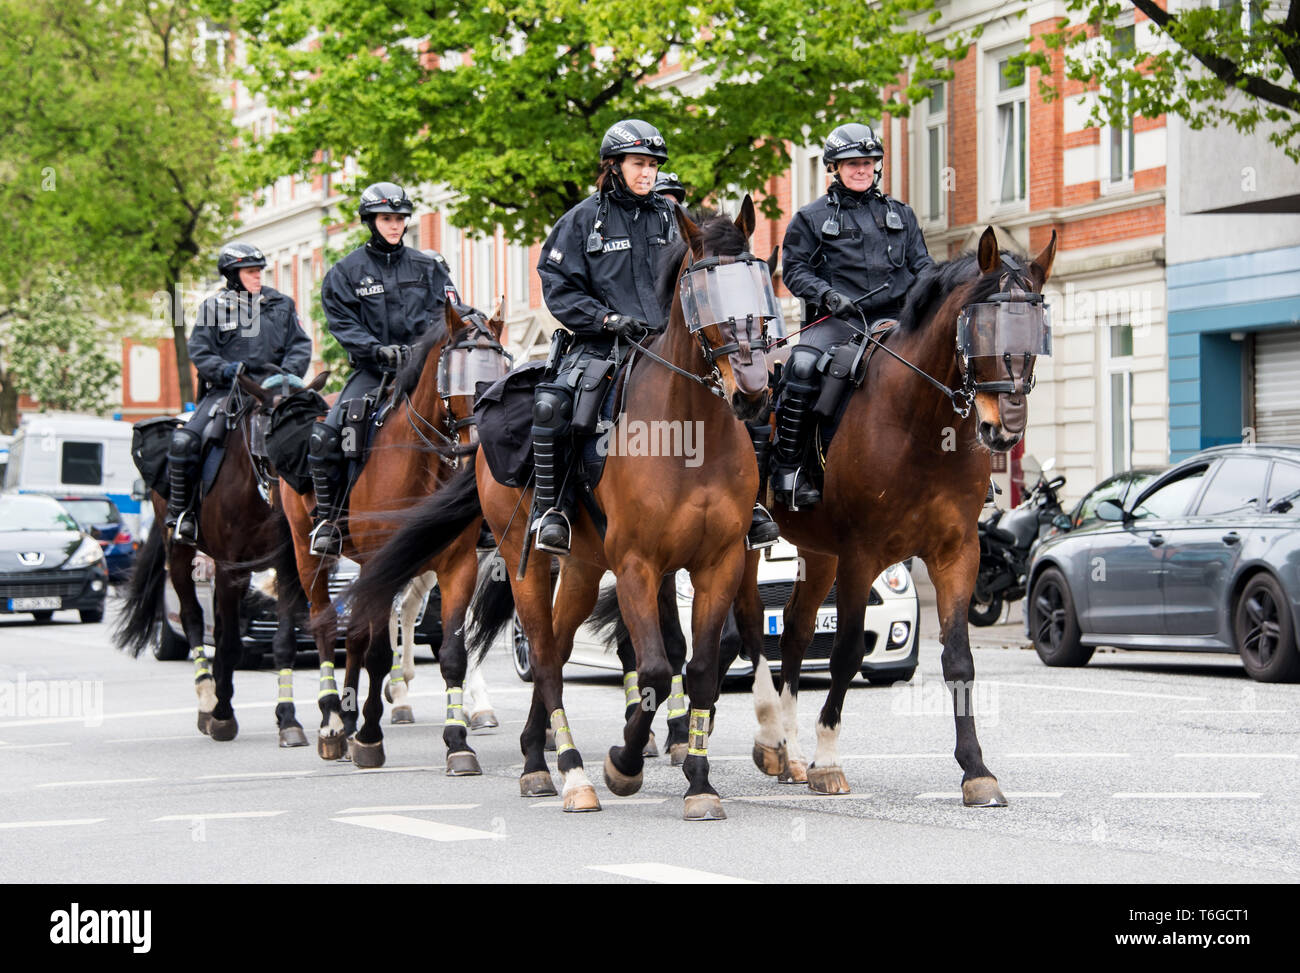 Hamburg, Germany. 01st May, 2019. Police officers on police horses ride in  front of the "Revolutionaries May 1 Demonstration" through the Altona  district. Credit: Daniel Bockwoldt/dpa/Alamy Live News Stock Photo - Alamy